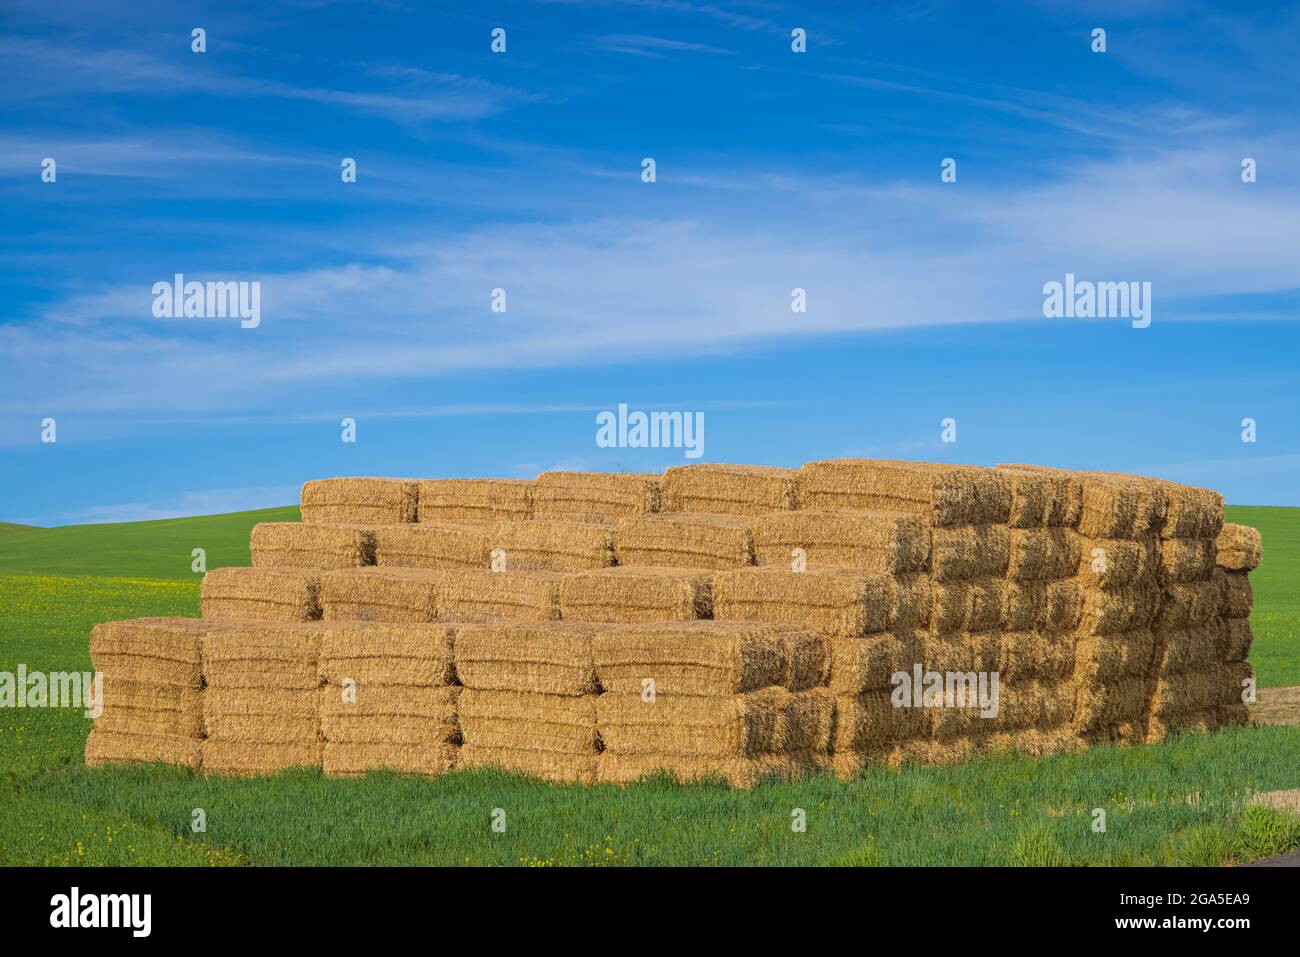 Hay bales in the agricultural Palouse area of eastern Washington state Stock Photo